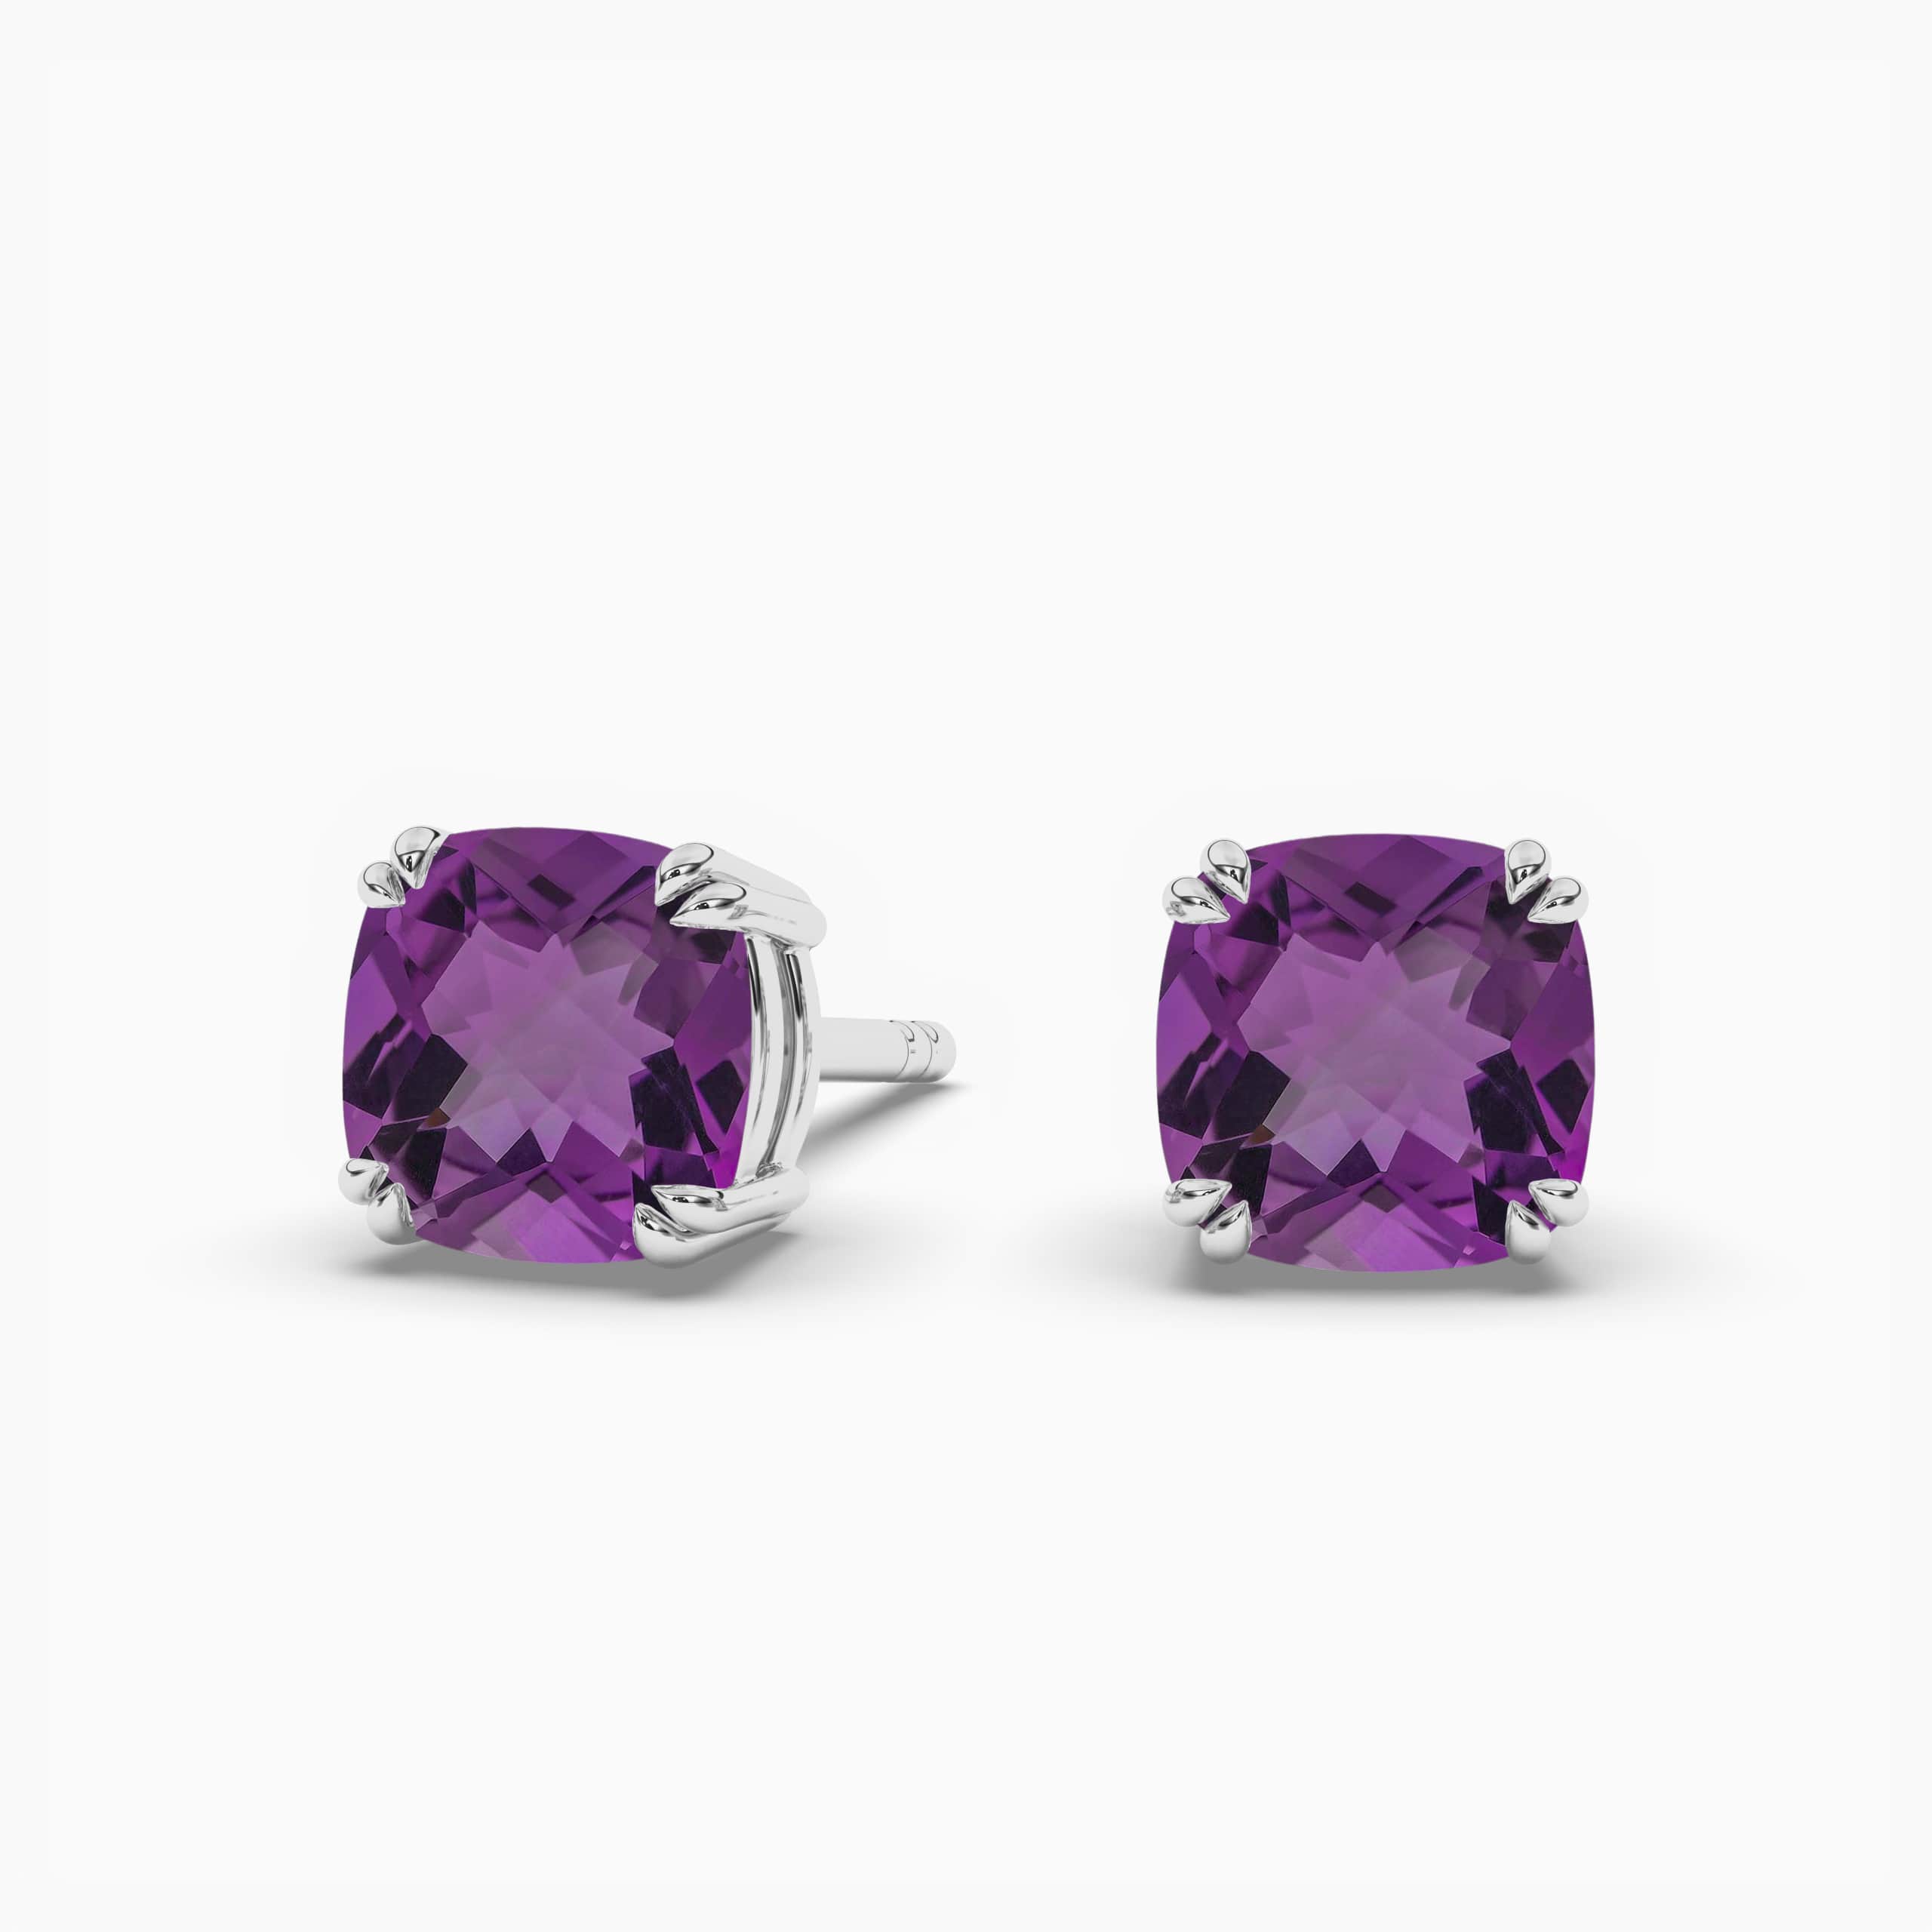 Cushion Amethyst Ladies Solitaire Stud Earrings White Gold